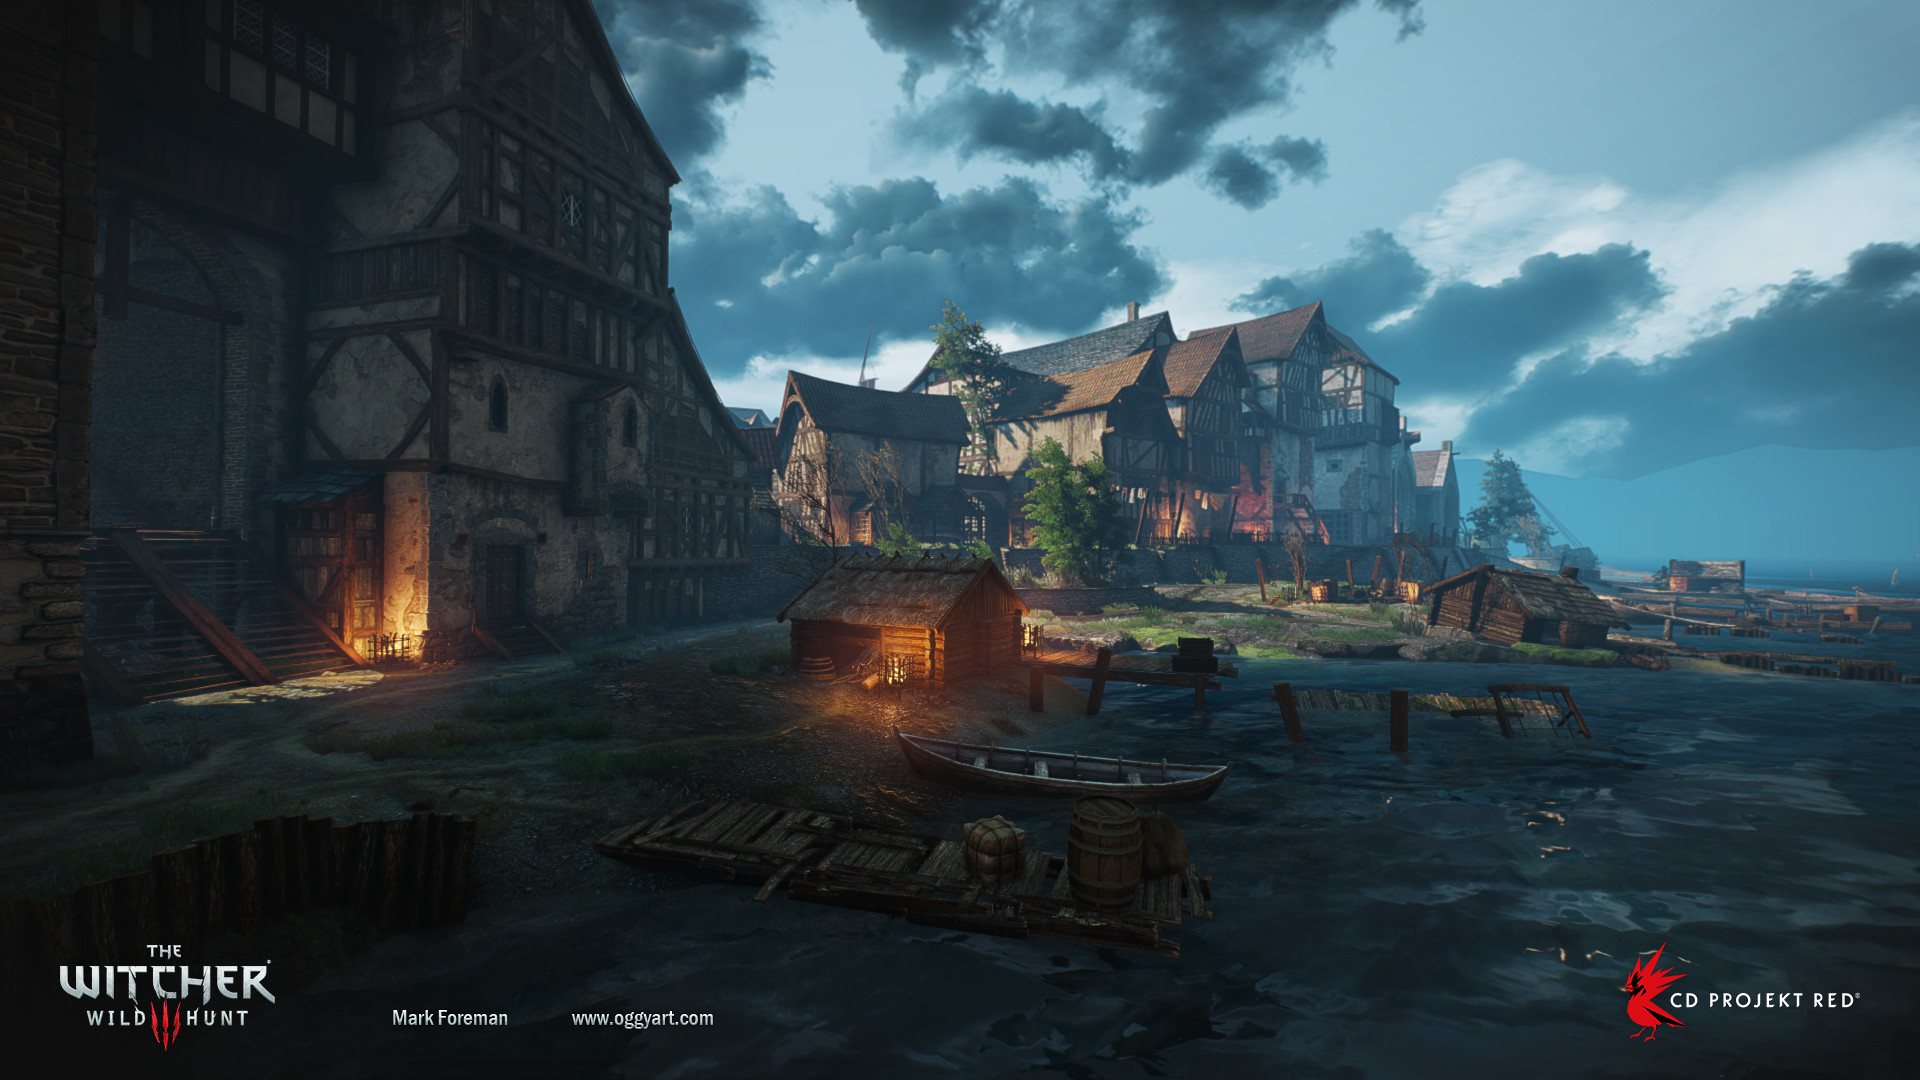 House Near Water The Witcher 3 Wild Hunt Wallpaper - Witcher - HD Wallpaper 